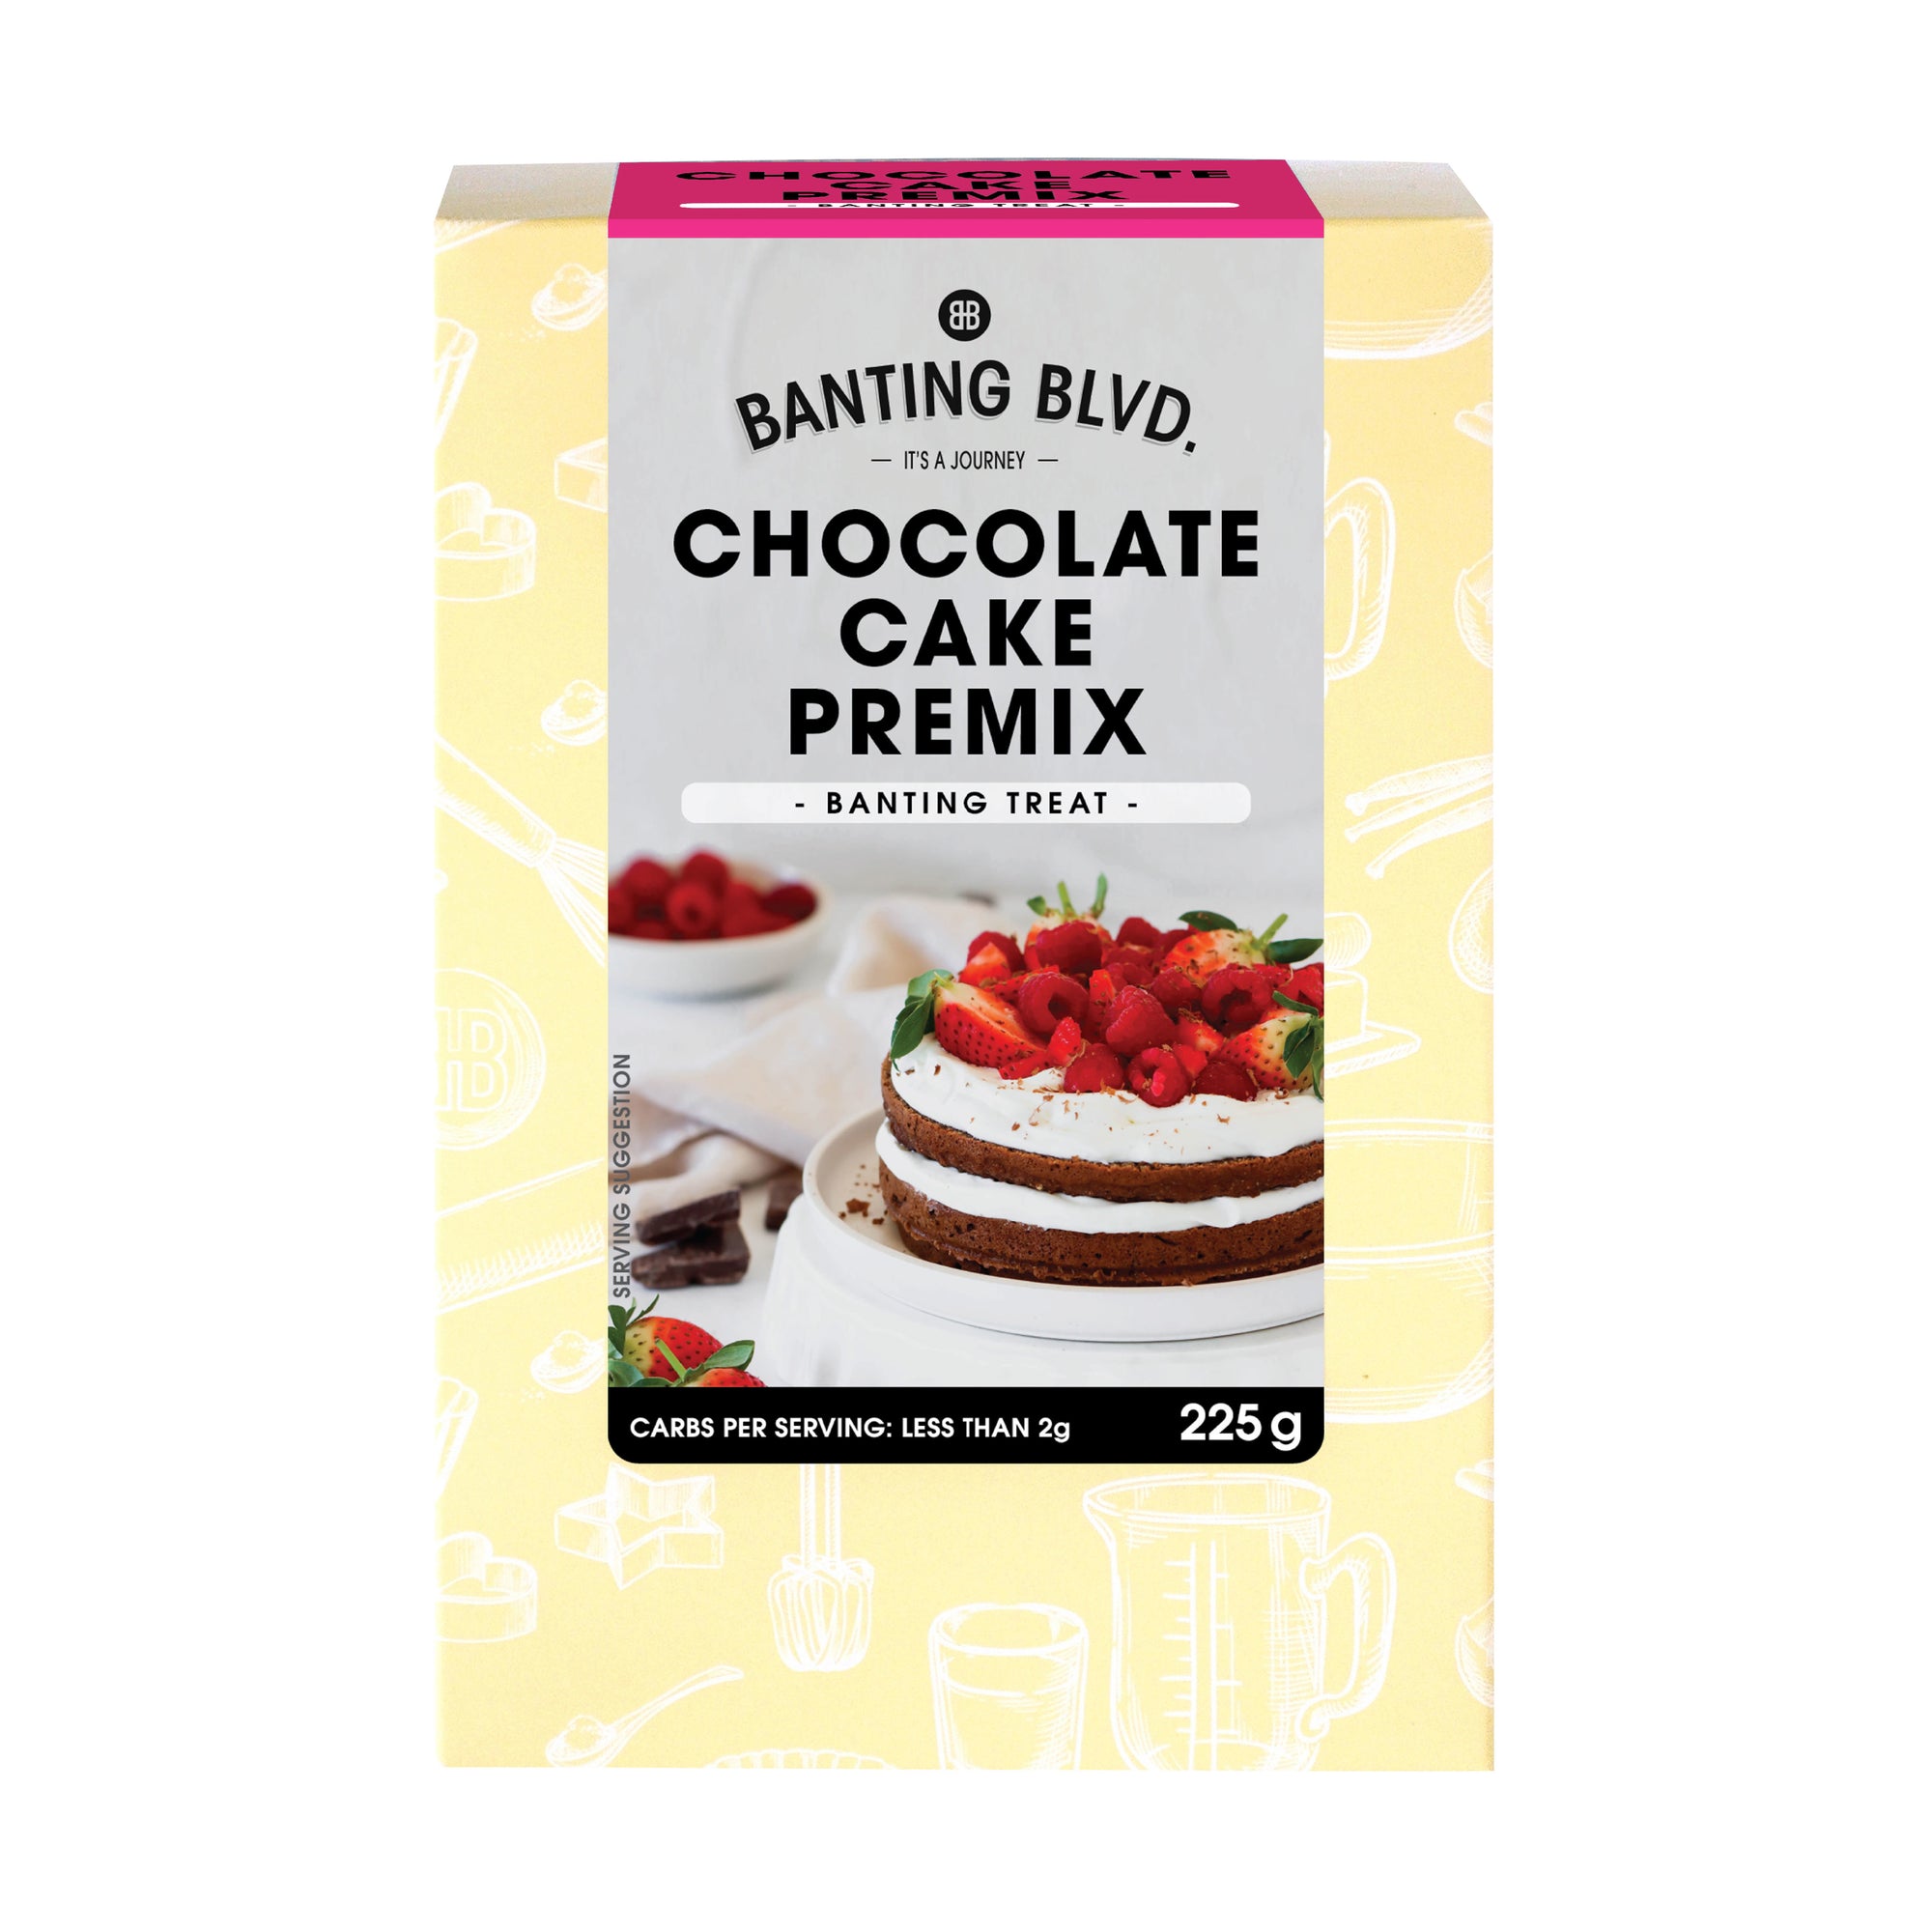 REVIEW: Professional Baker Finds Best Boxed Chocolate Cake Mix to Buy